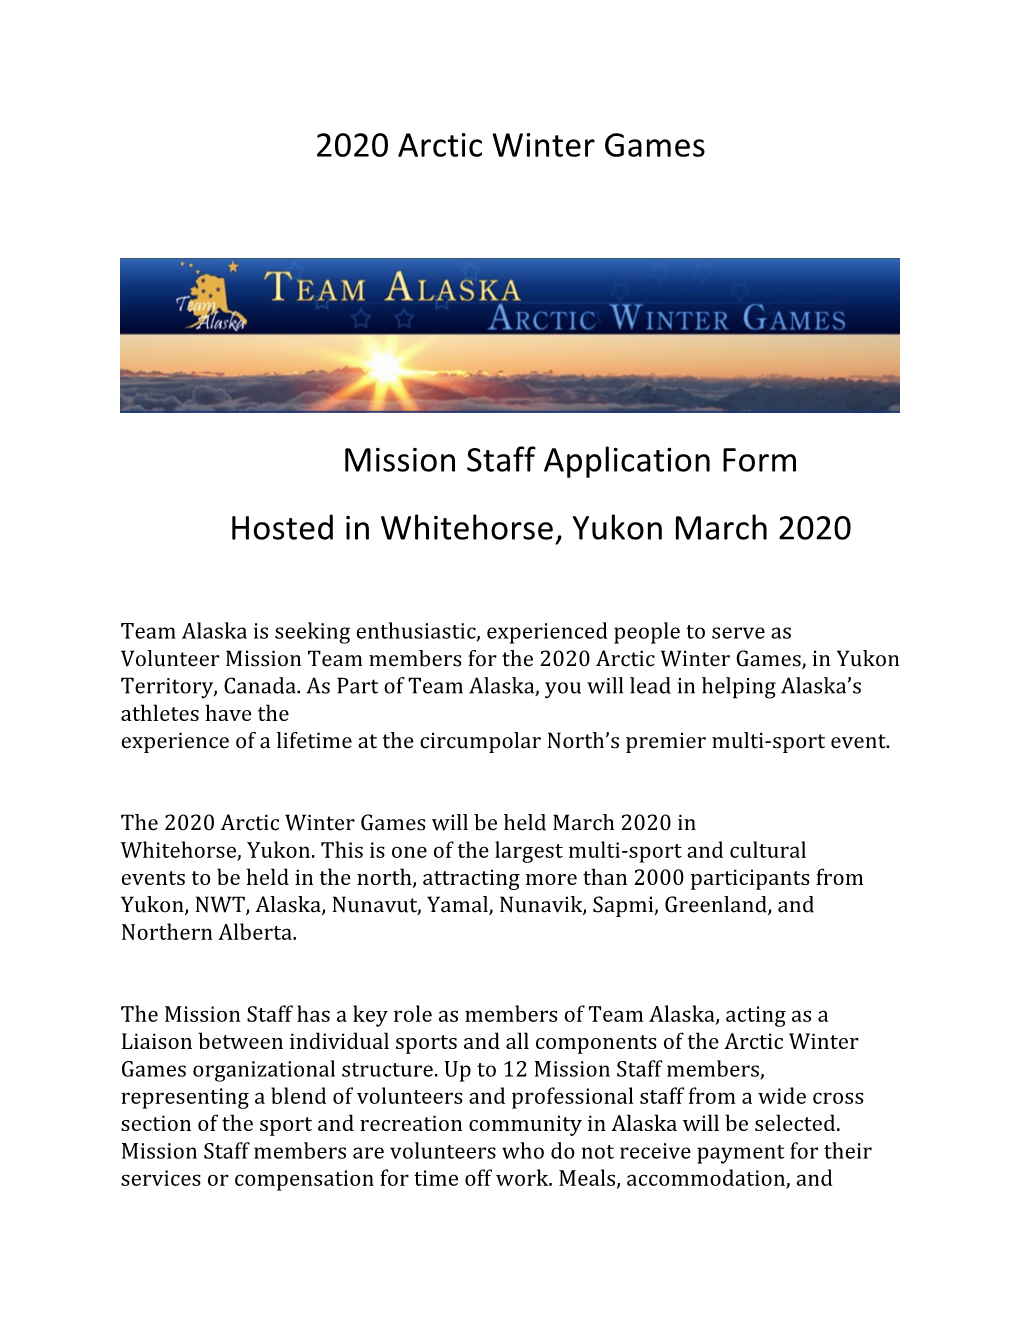 2020 Arctic Winter Games Mission Staff Application Form Hosted In